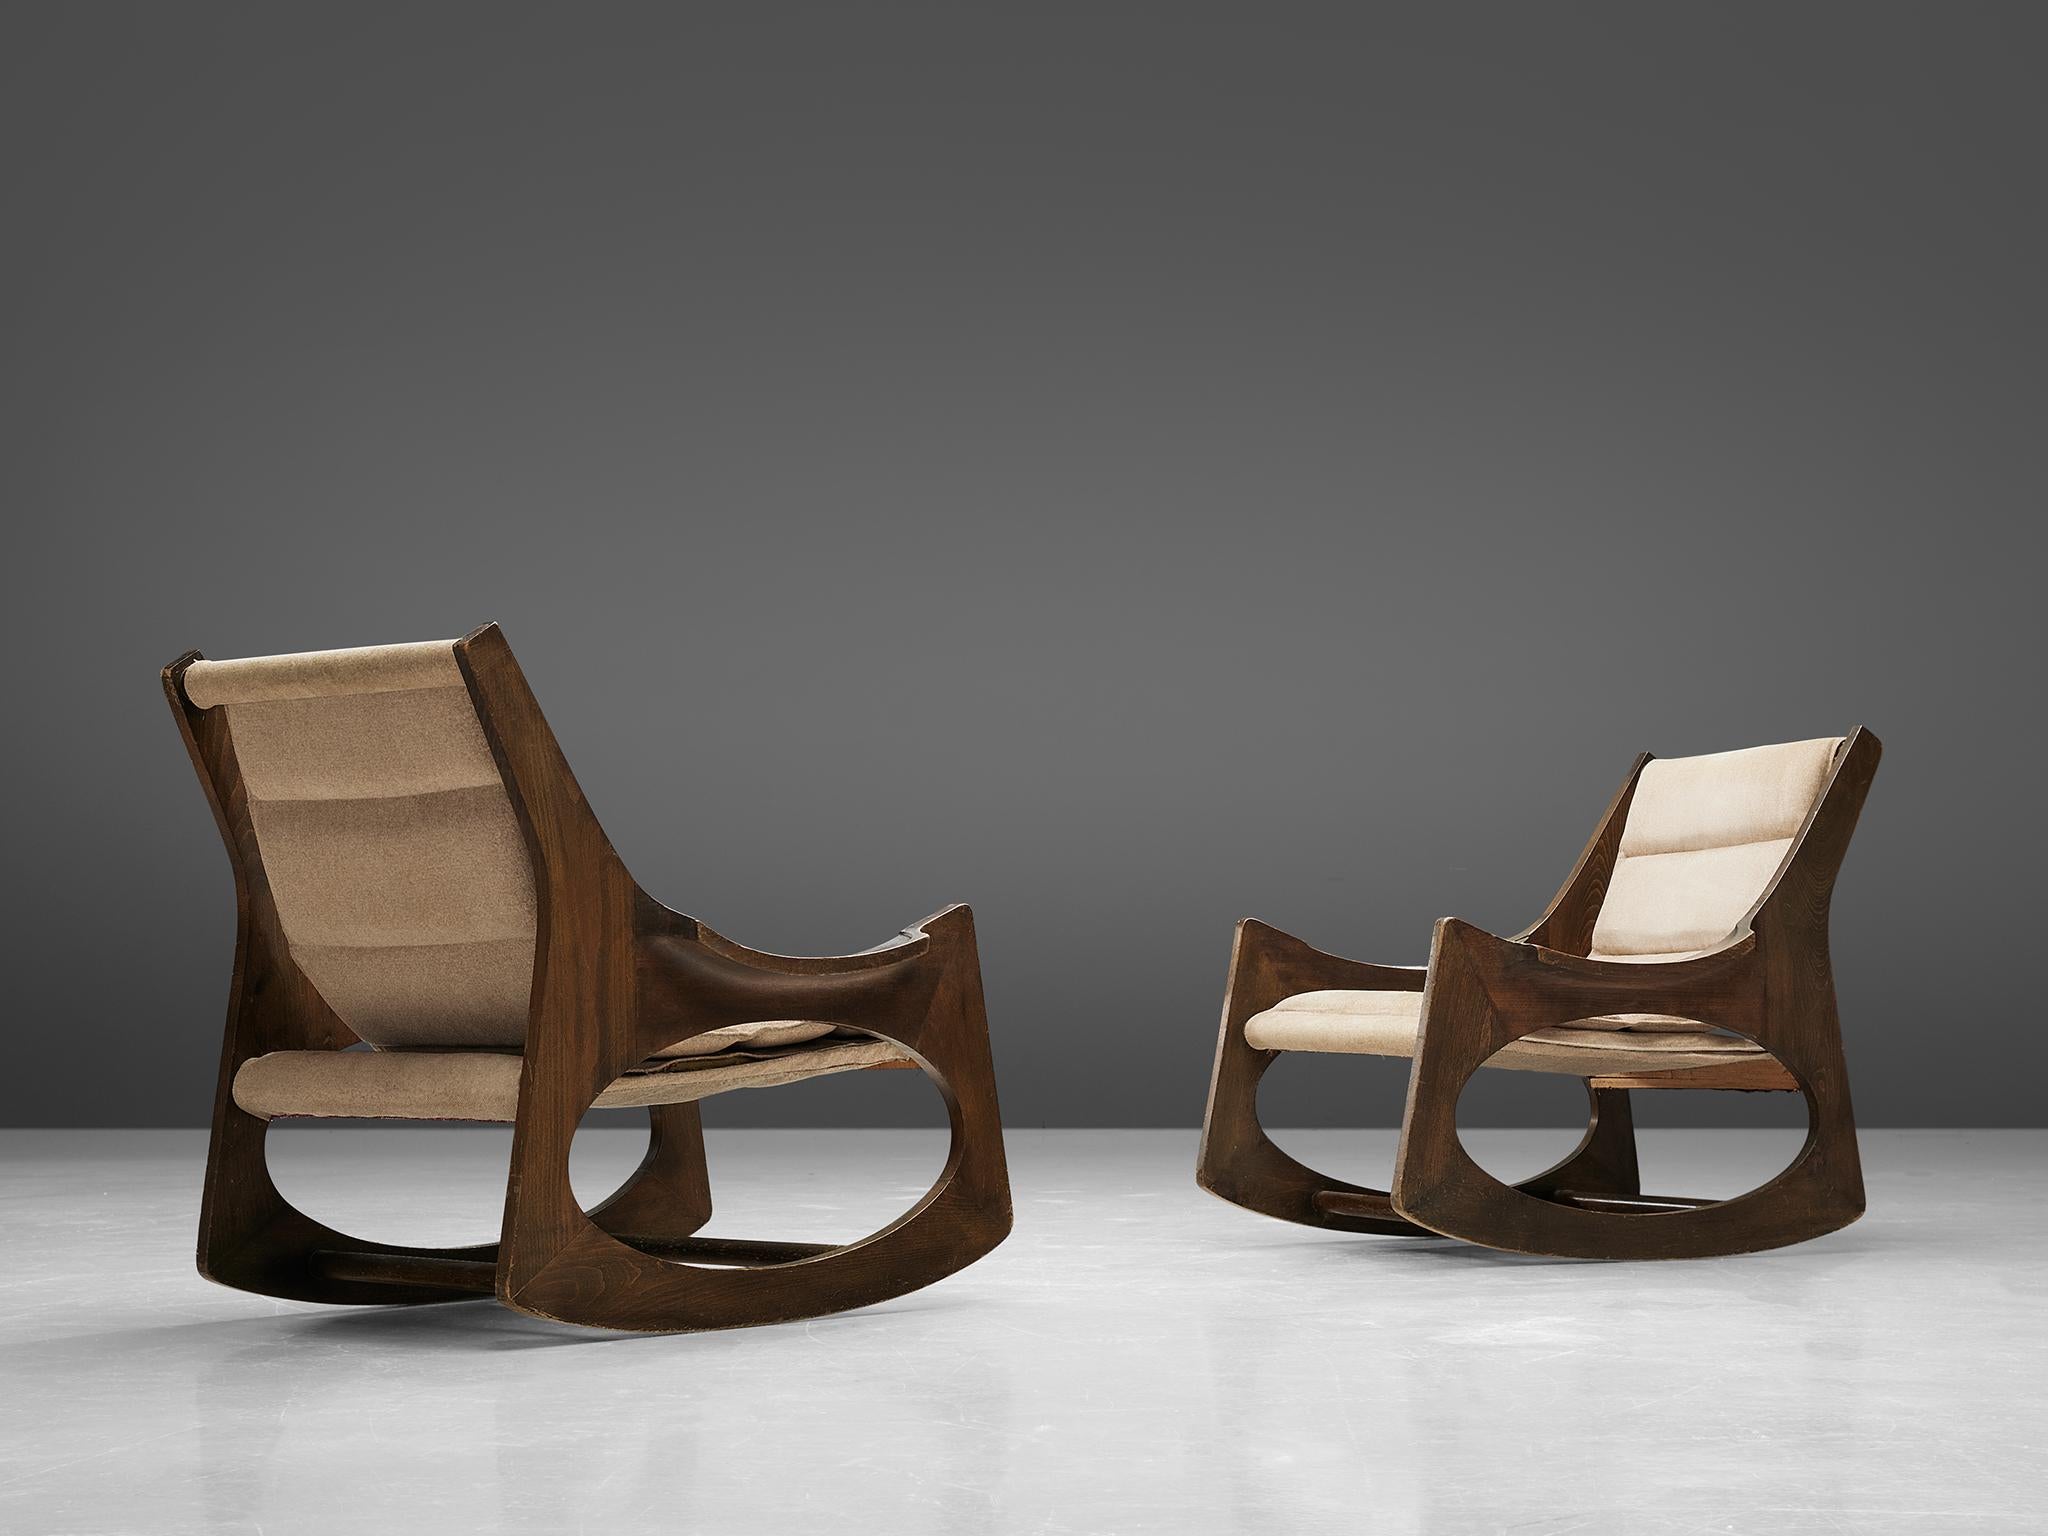 Jordi Vilanova i Bosch,' Tartera' rocking chairs, boxwood, beech, and fabric, Spain, design 1961, manufacture 1960s.

These two wonderful rocking chairs are made with two symmetrical side pieces, which integrate the structure of the backrest, arms,